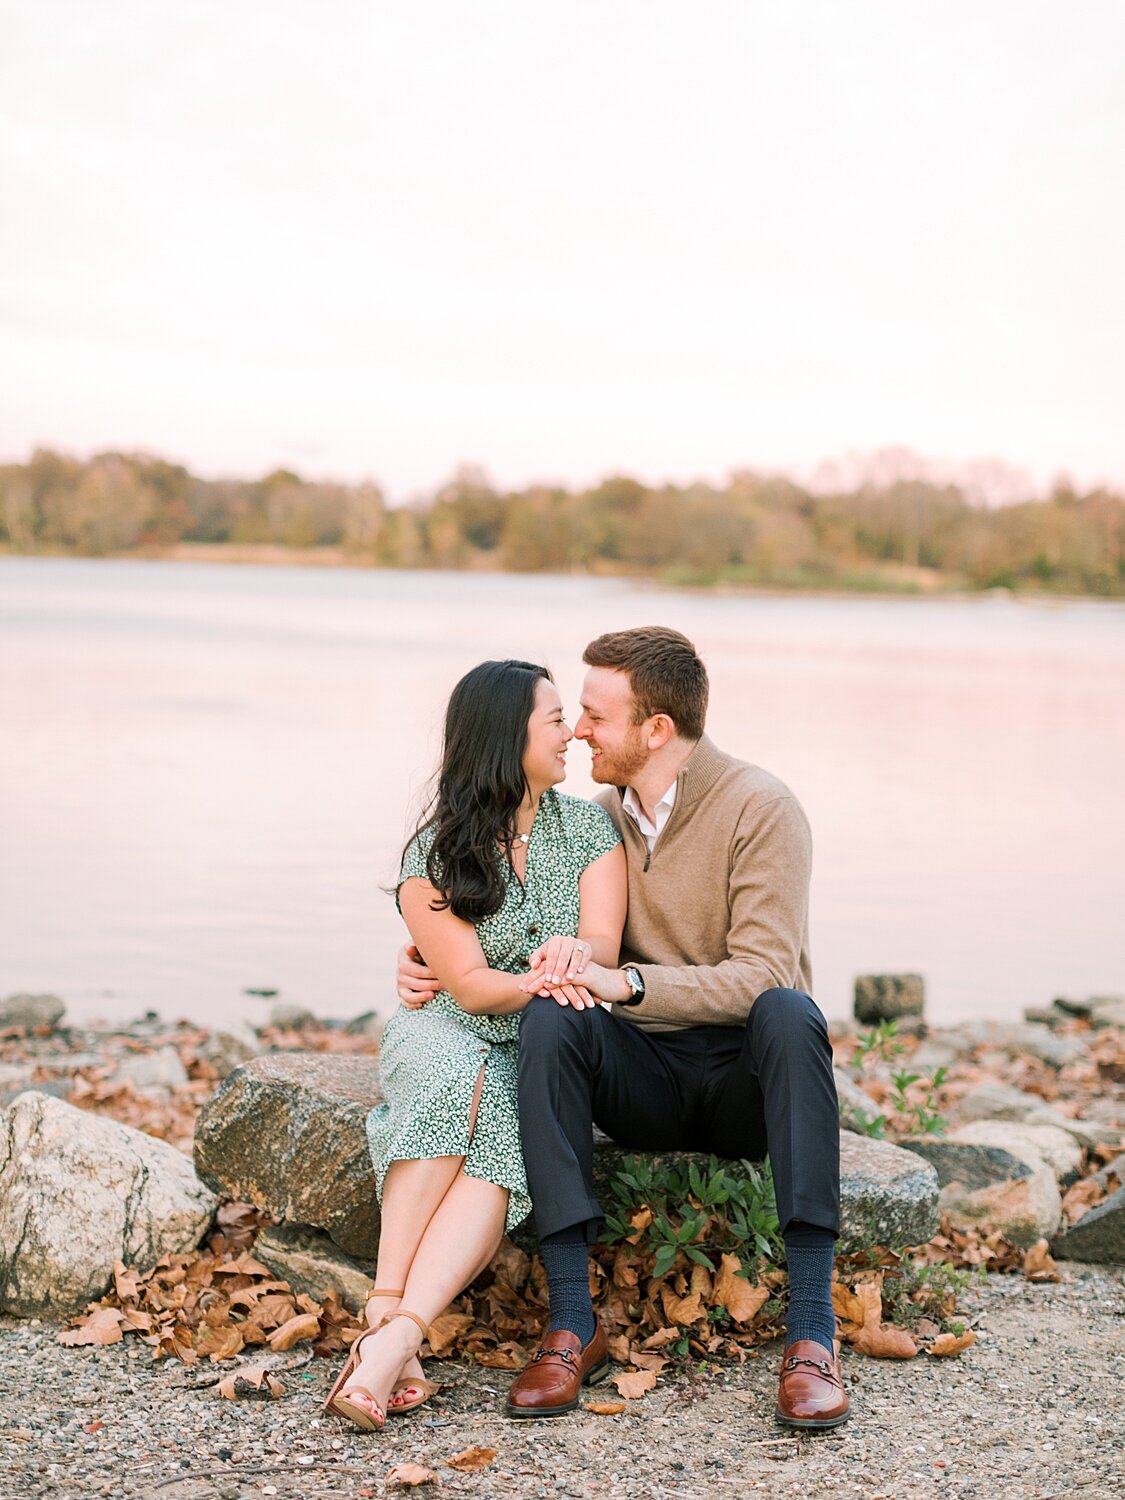 New york beach engagement session by Asher Gardner Photography